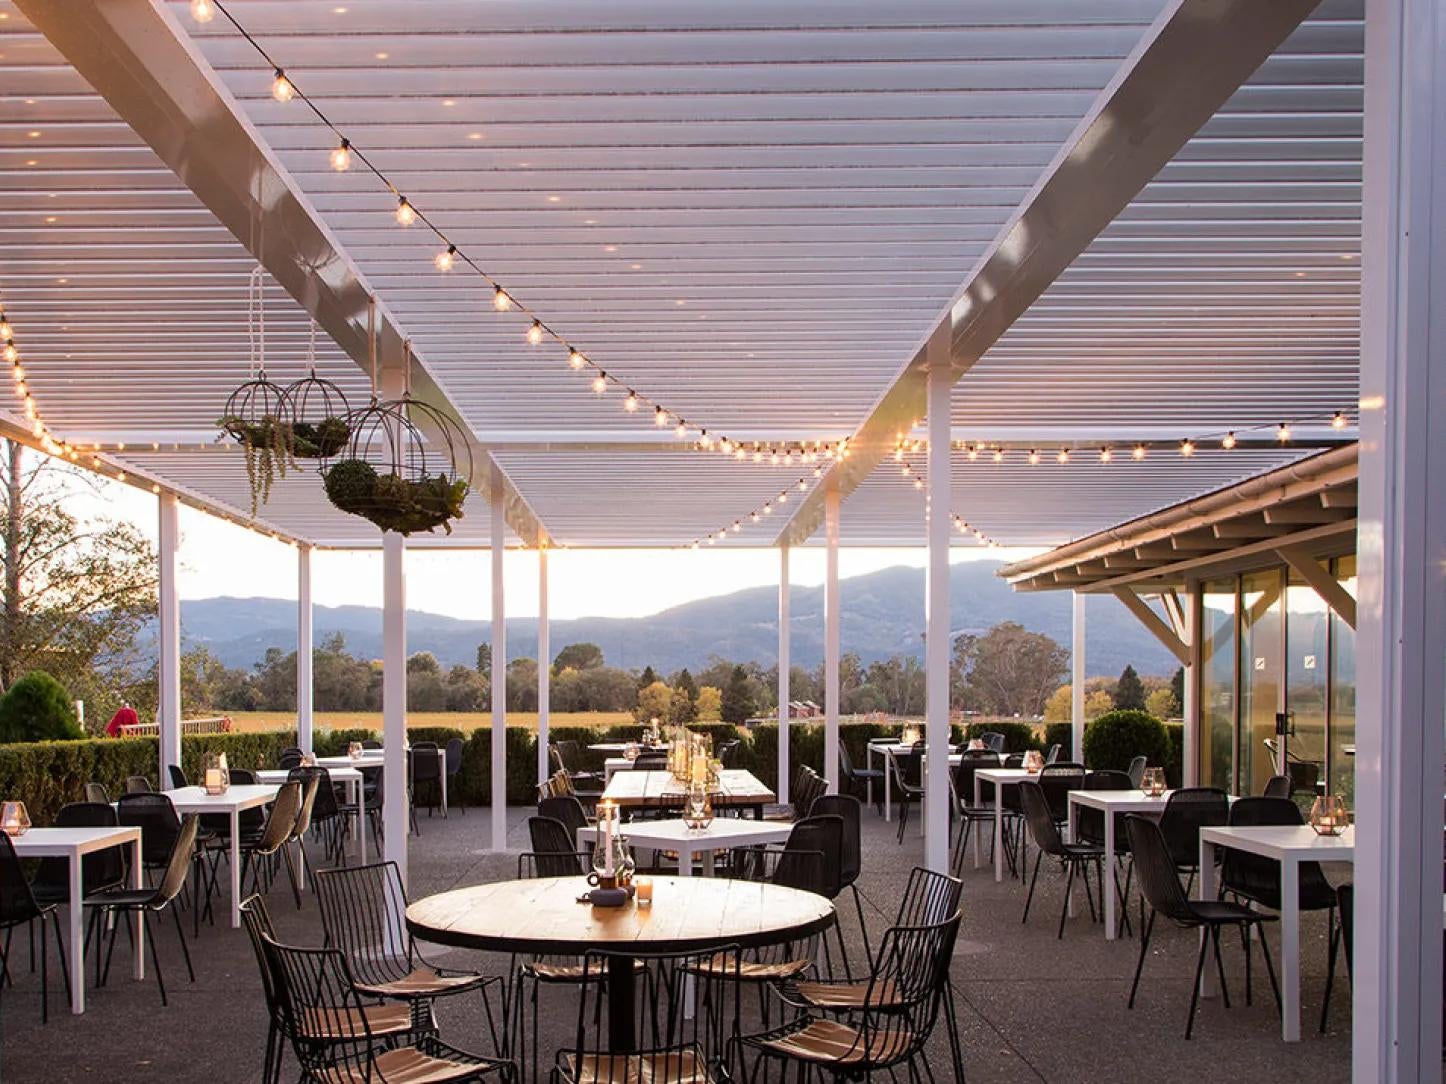 An outdoor dining terrace at the Mumm Napa winery in California.